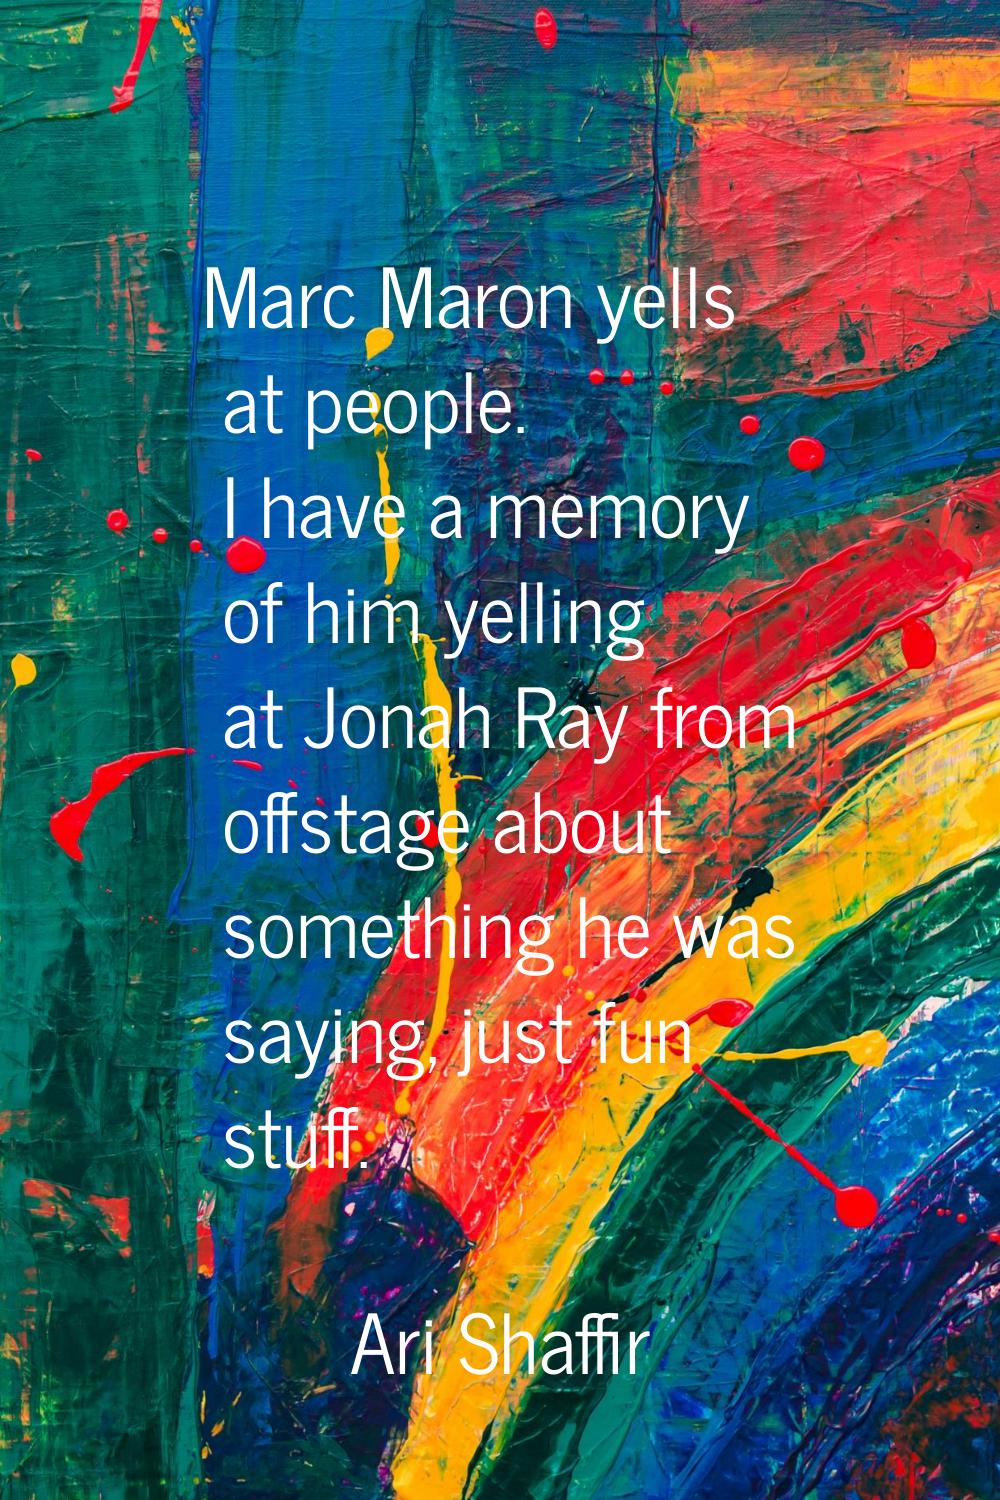 Marc Maron yells at people. I have a memory of him yelling at Jonah Ray from offstage about somethi